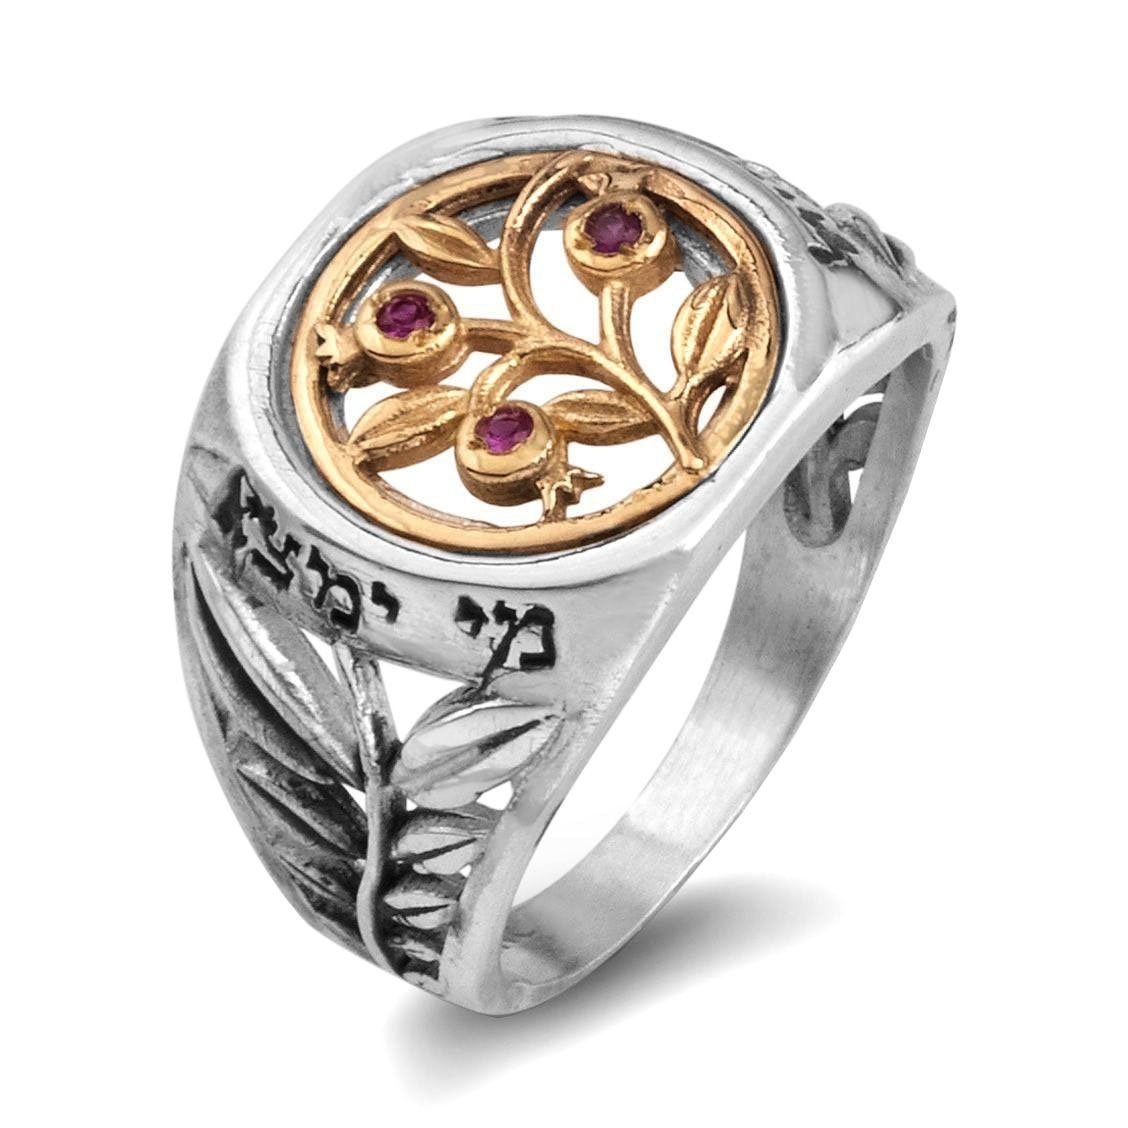 Our 10 Favorite Pomegranate Jewelry Pieces from Israel